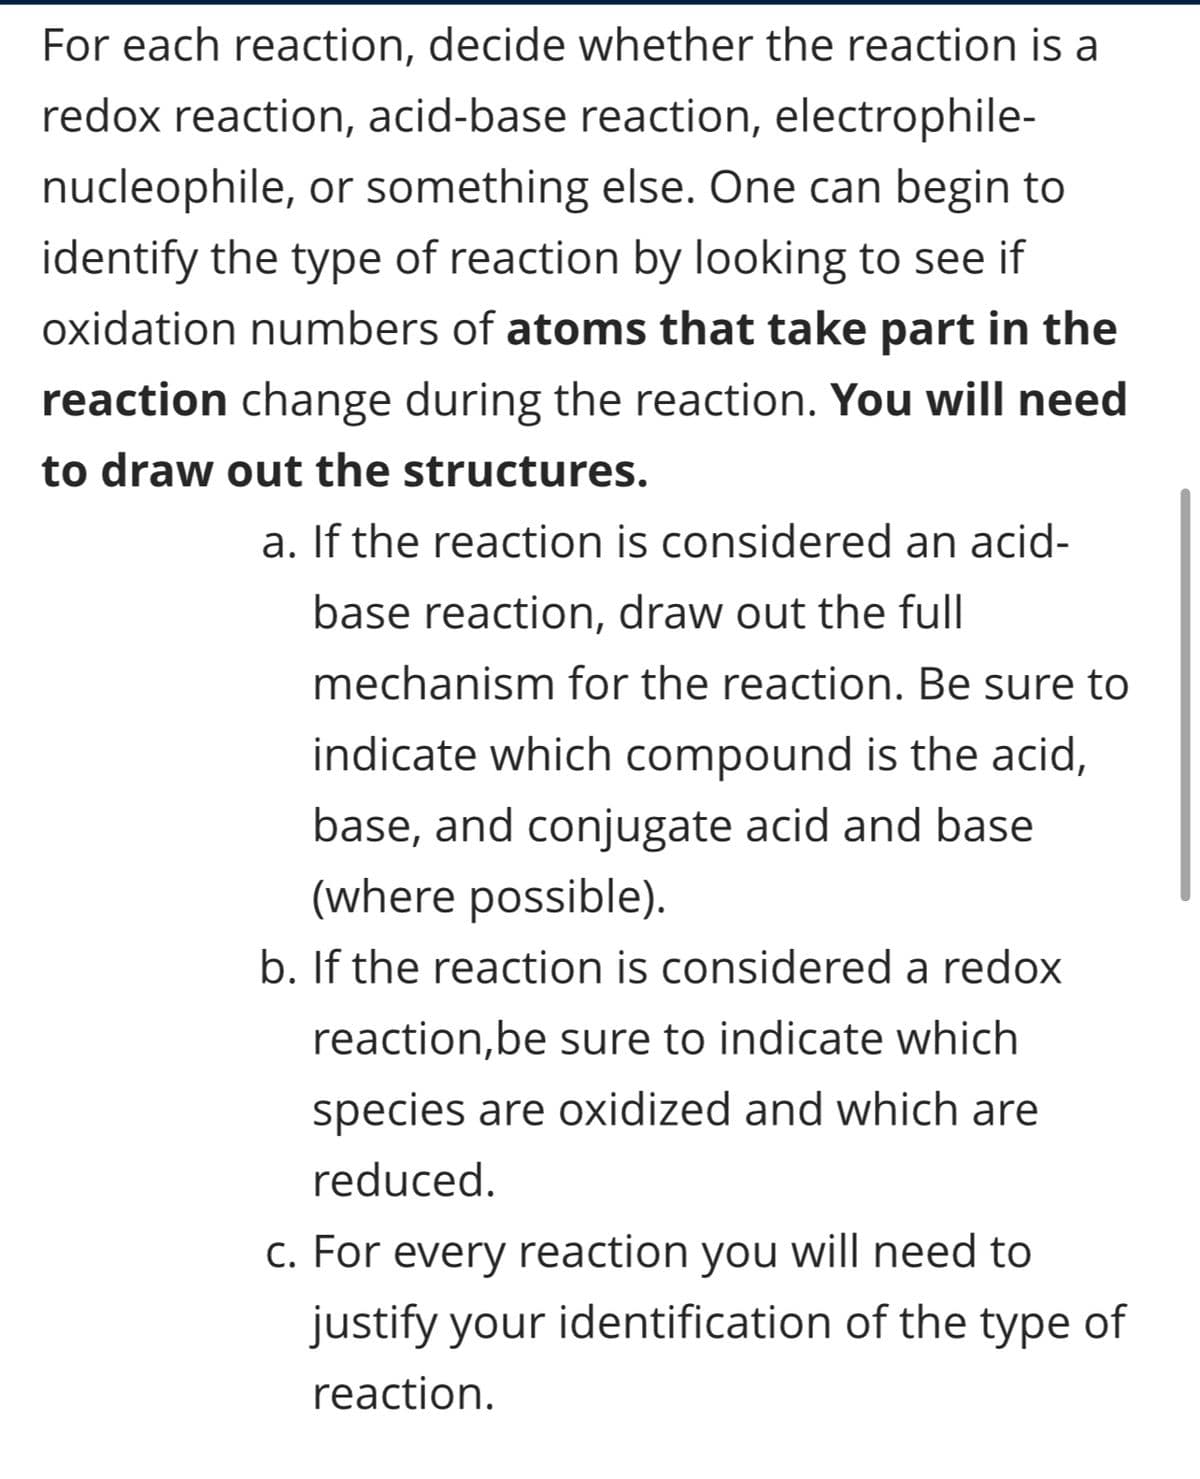 For each reaction, decide whether the reaction is a
redox reaction, acid-base reaction, electrophile-
nucleophile, or something else. One can begin to
identify the type of reaction by looking to see if
oxidation numbers of atoms that take part in the
reaction change during the reaction. You will need
to draw out the structures.
a. If the reaction is considered an acid-
base reaction, draw out the full
mechanism for the reaction. Be sure to
indicate which compound is the acid,
base, and conjugate acid and base
(where possible).
b. If the reaction is considered a redox
reaction, be sure to indicate which
species are oxidized and which are
reduced.
c. For every reaction you will need to
justify your identification of the type of
reaction.